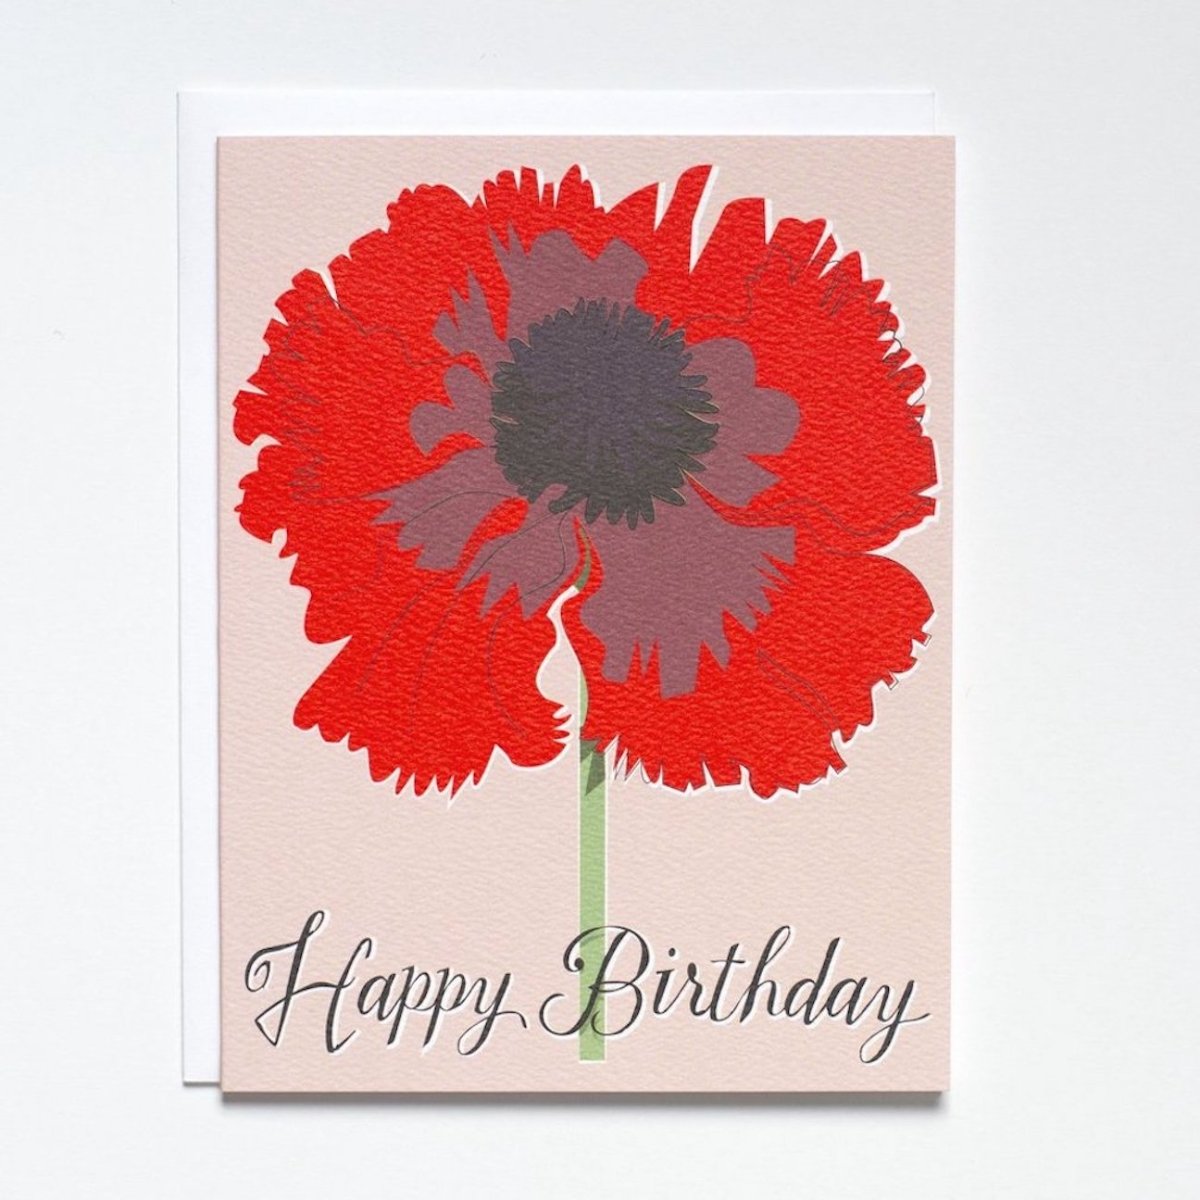 Beautiful bright red poppy against a pale pink background. Bottom of card reads: "HAPPY BIRTHDAY" in grey script. Made with recycled paper by Banquet Atelier in Vancouver, British Columbia, Canada.